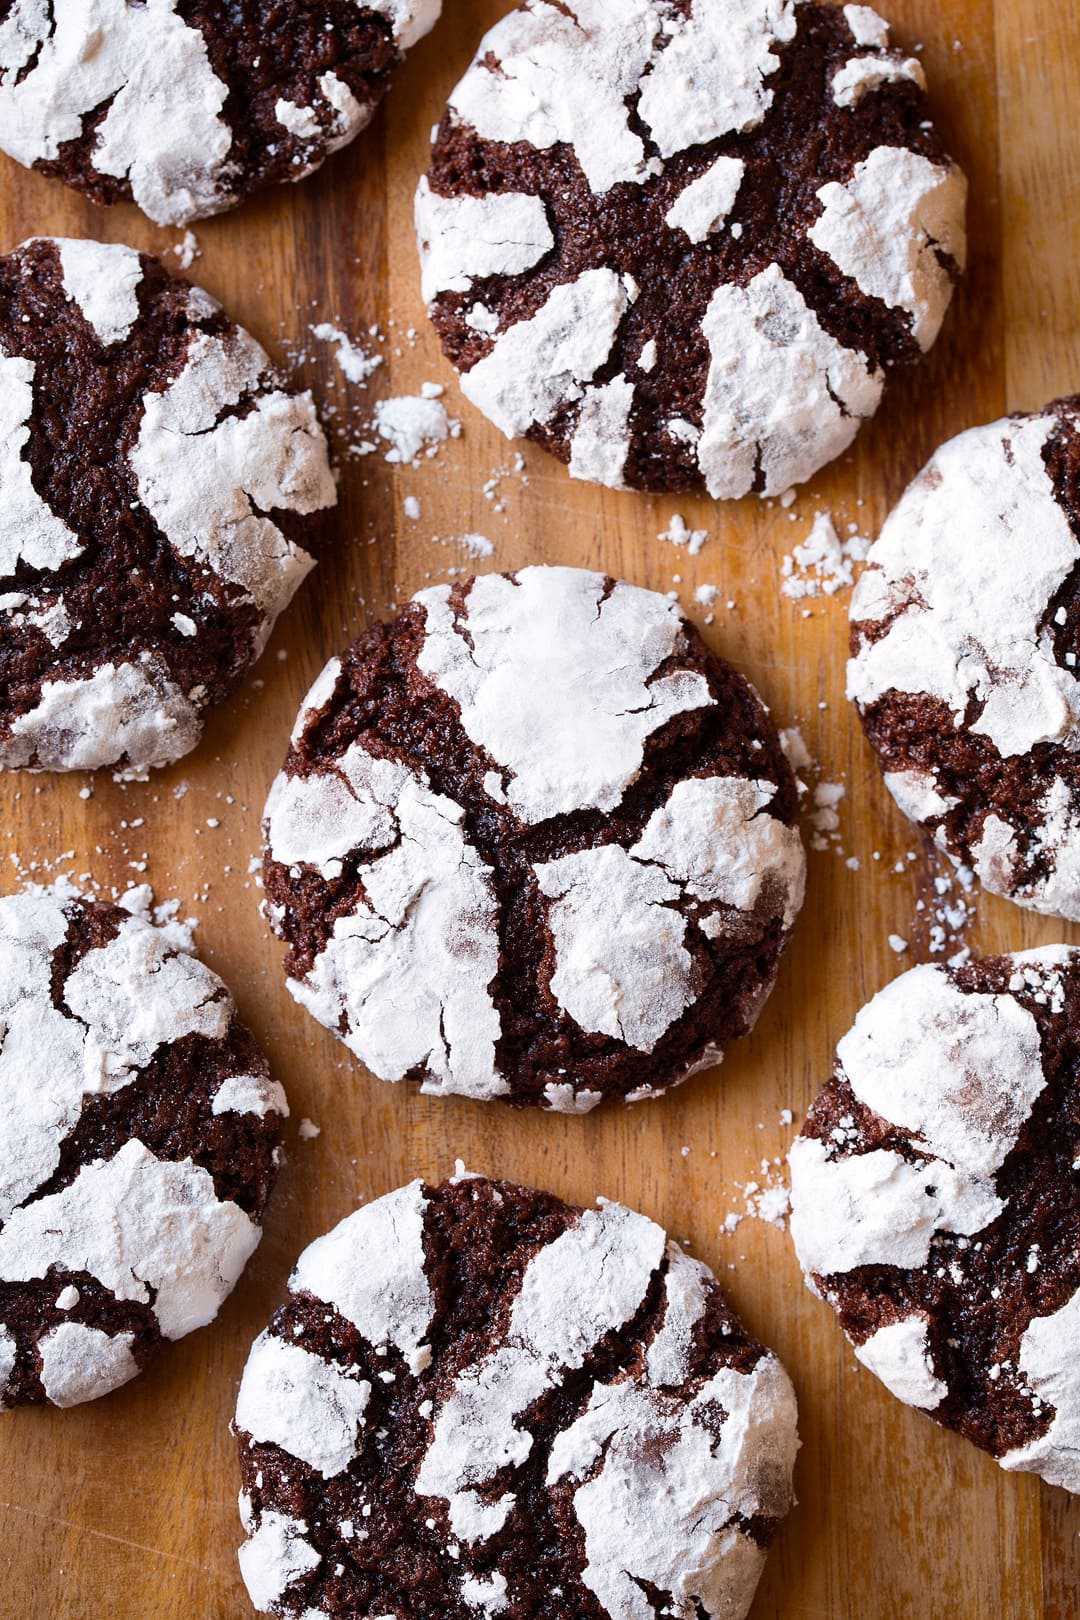 Chocolate Crinkle Cookies shown overhead laying on a wooden surface.